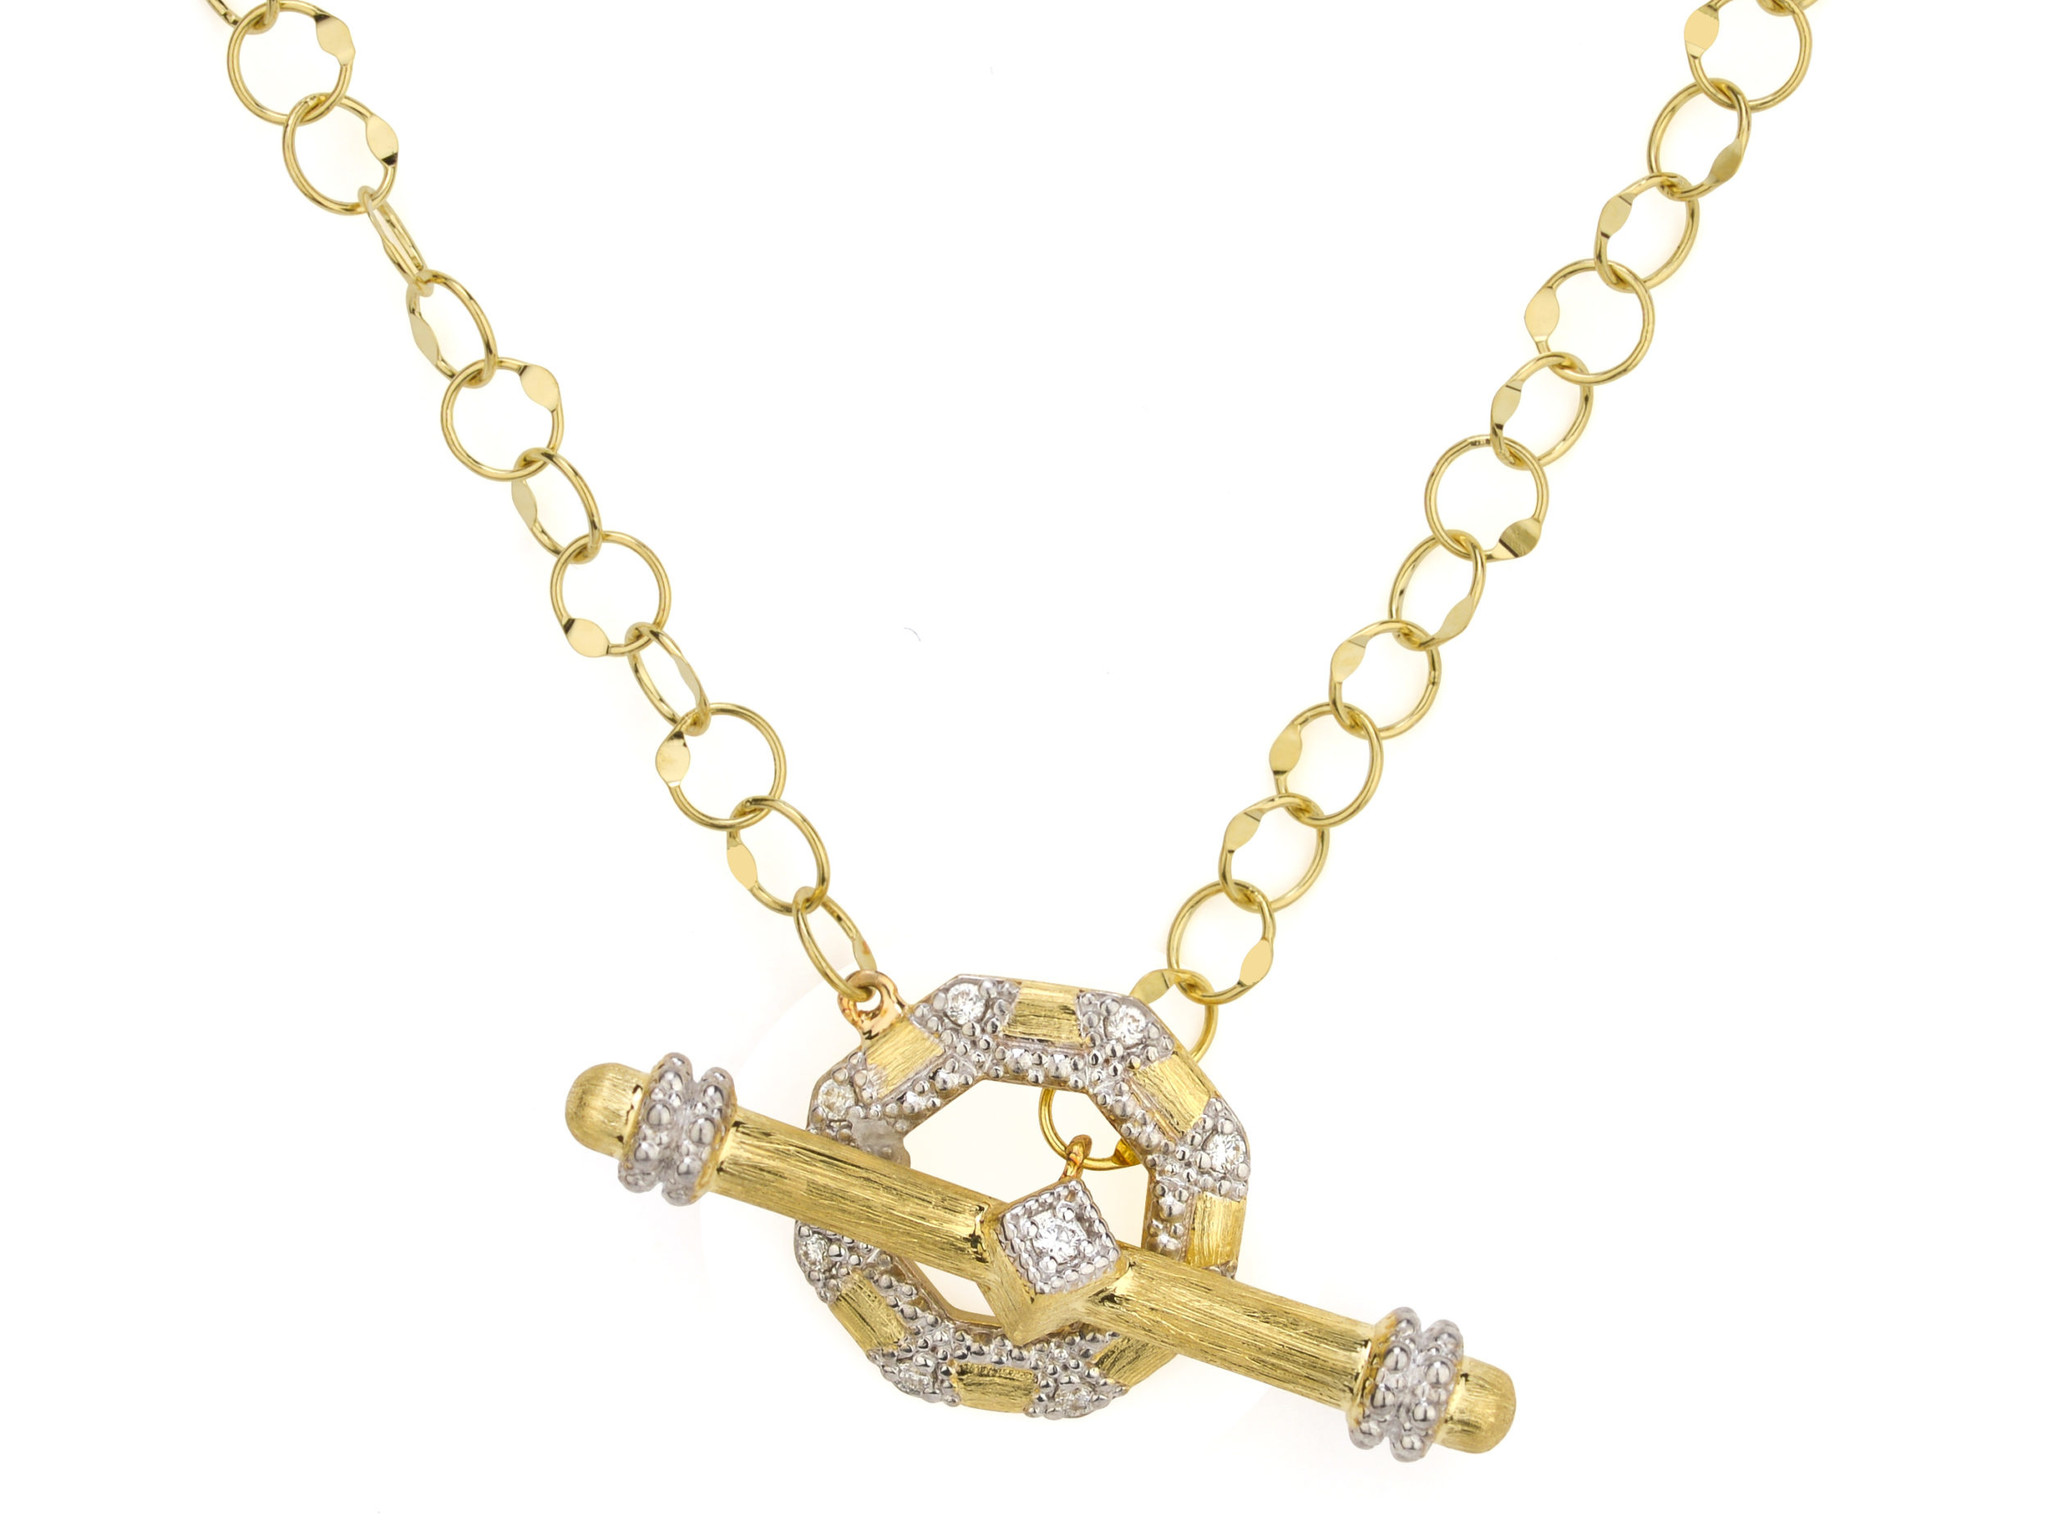 Petit Anjou Double Flat Chain Toggle Necklace - Gold